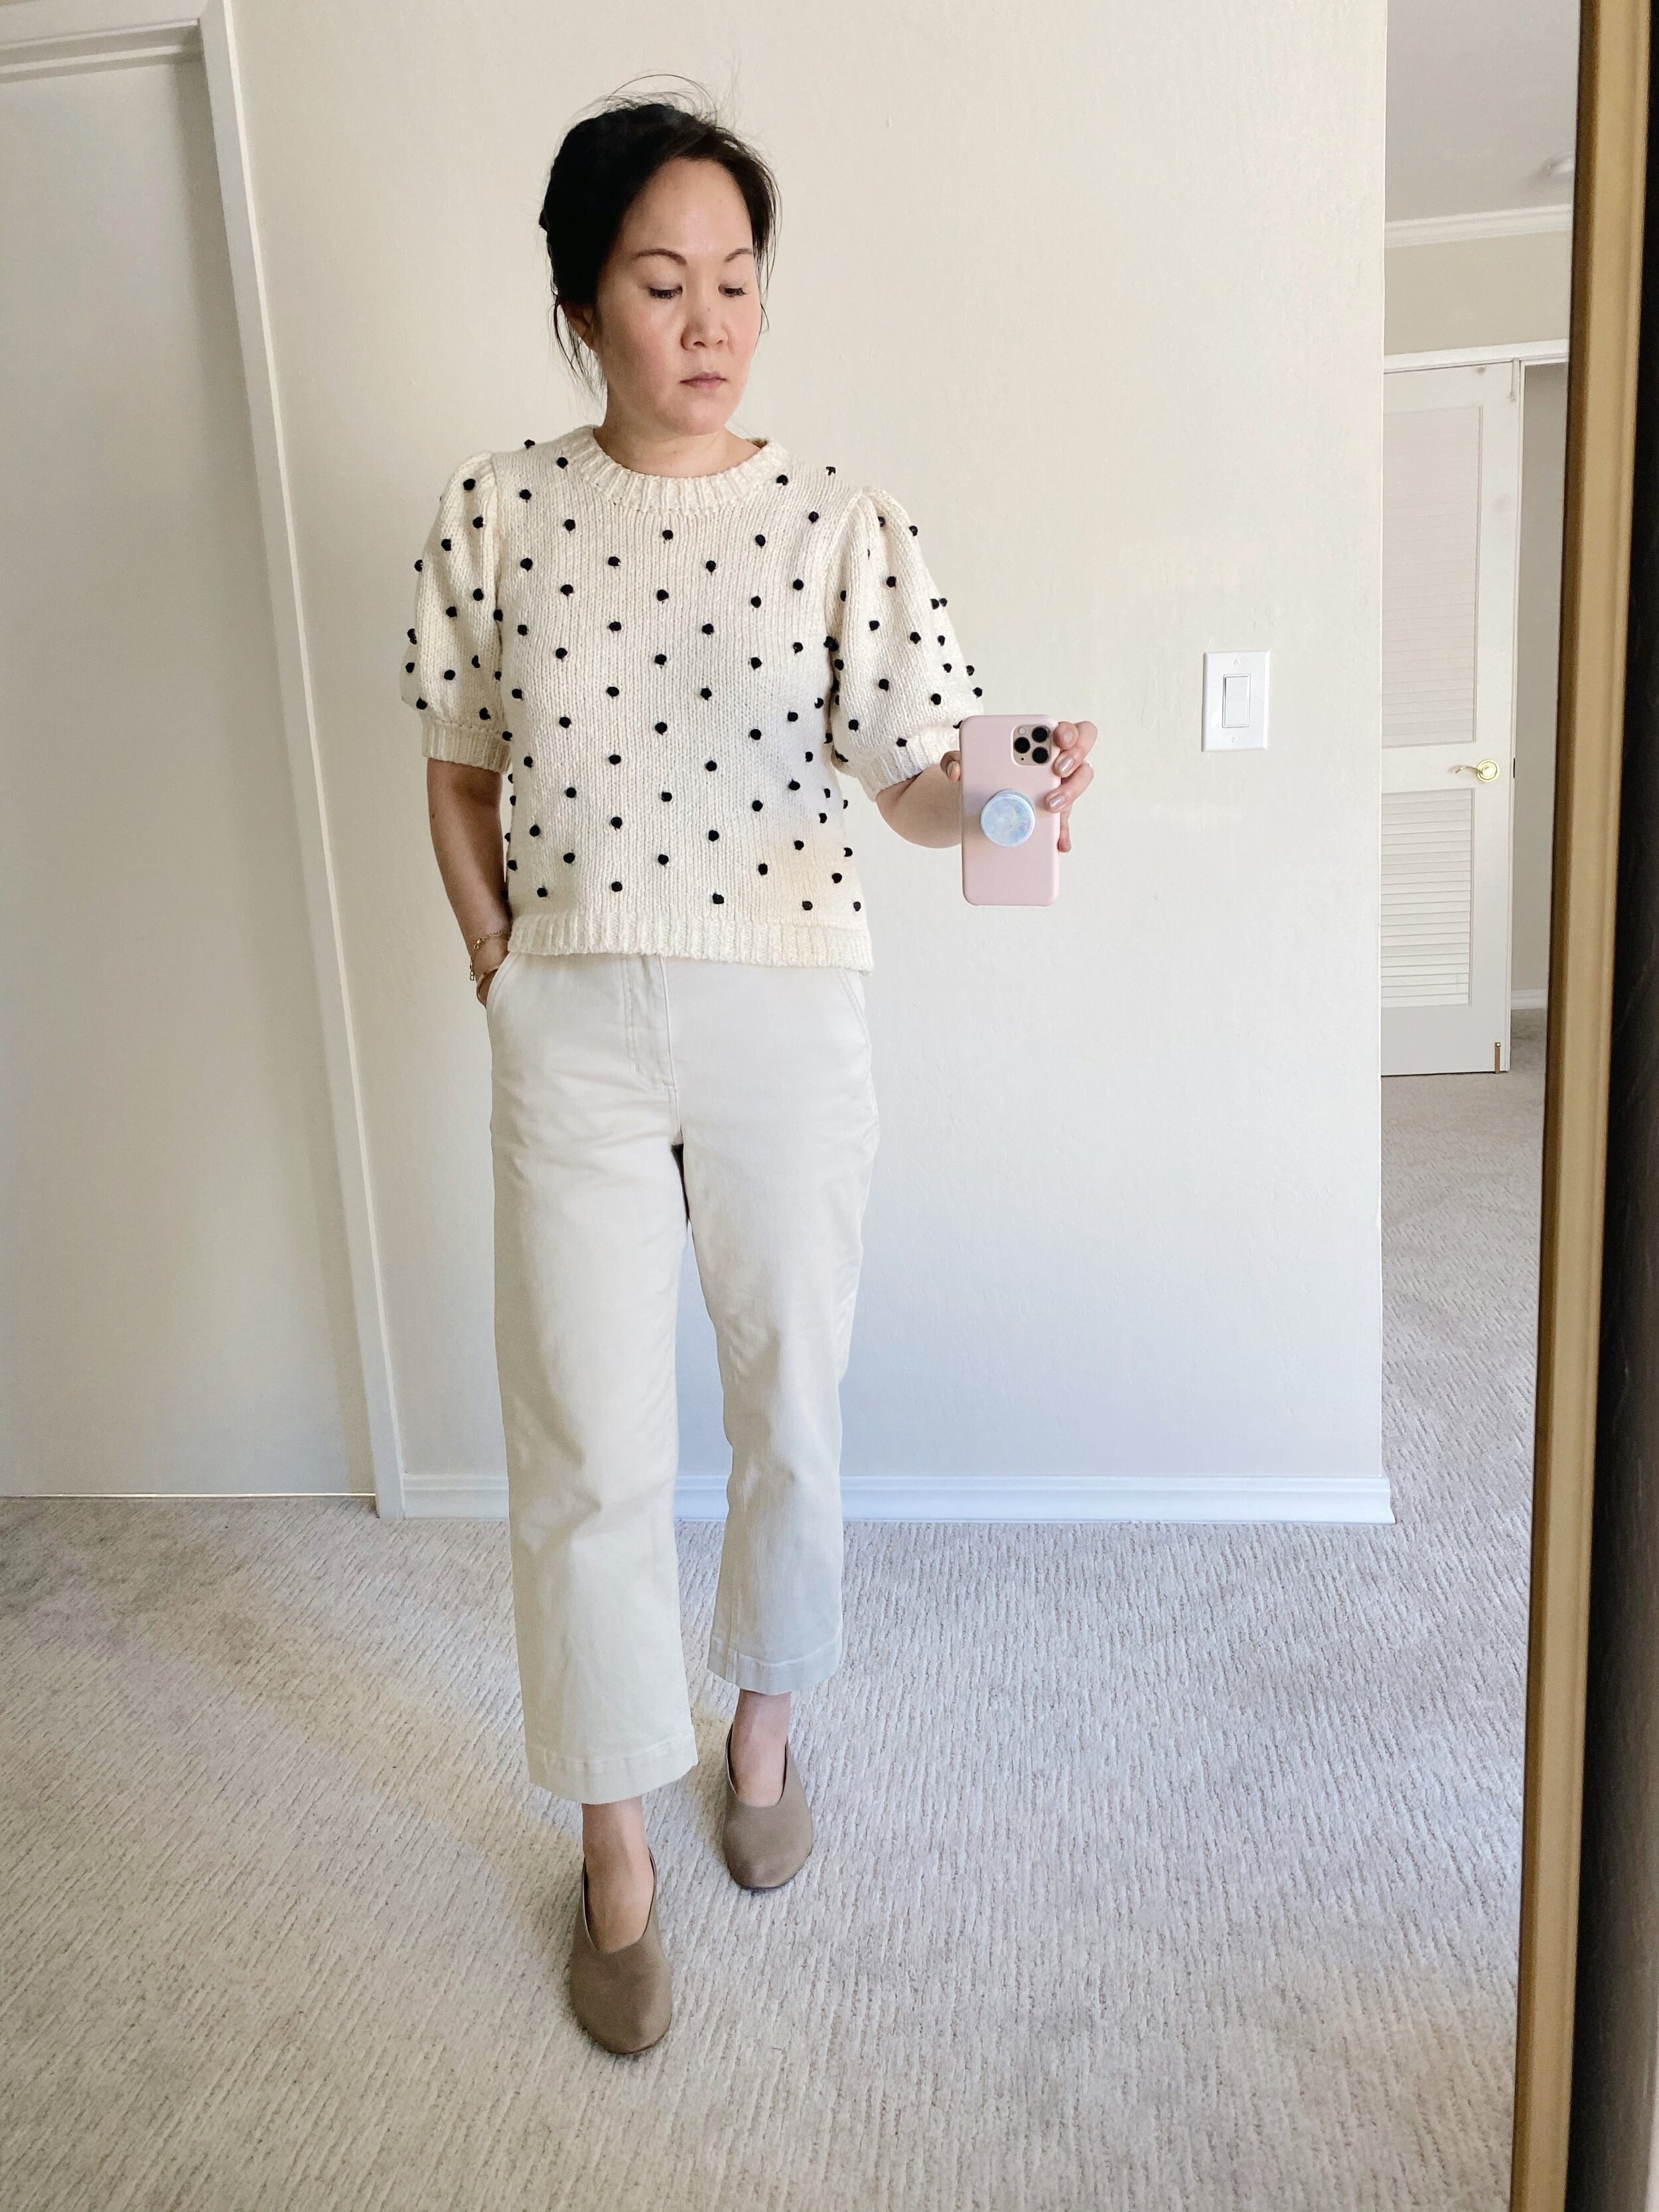 Everlane Review: The Straight Leg Crop + Giveaway {Closed} — Fairly Curated